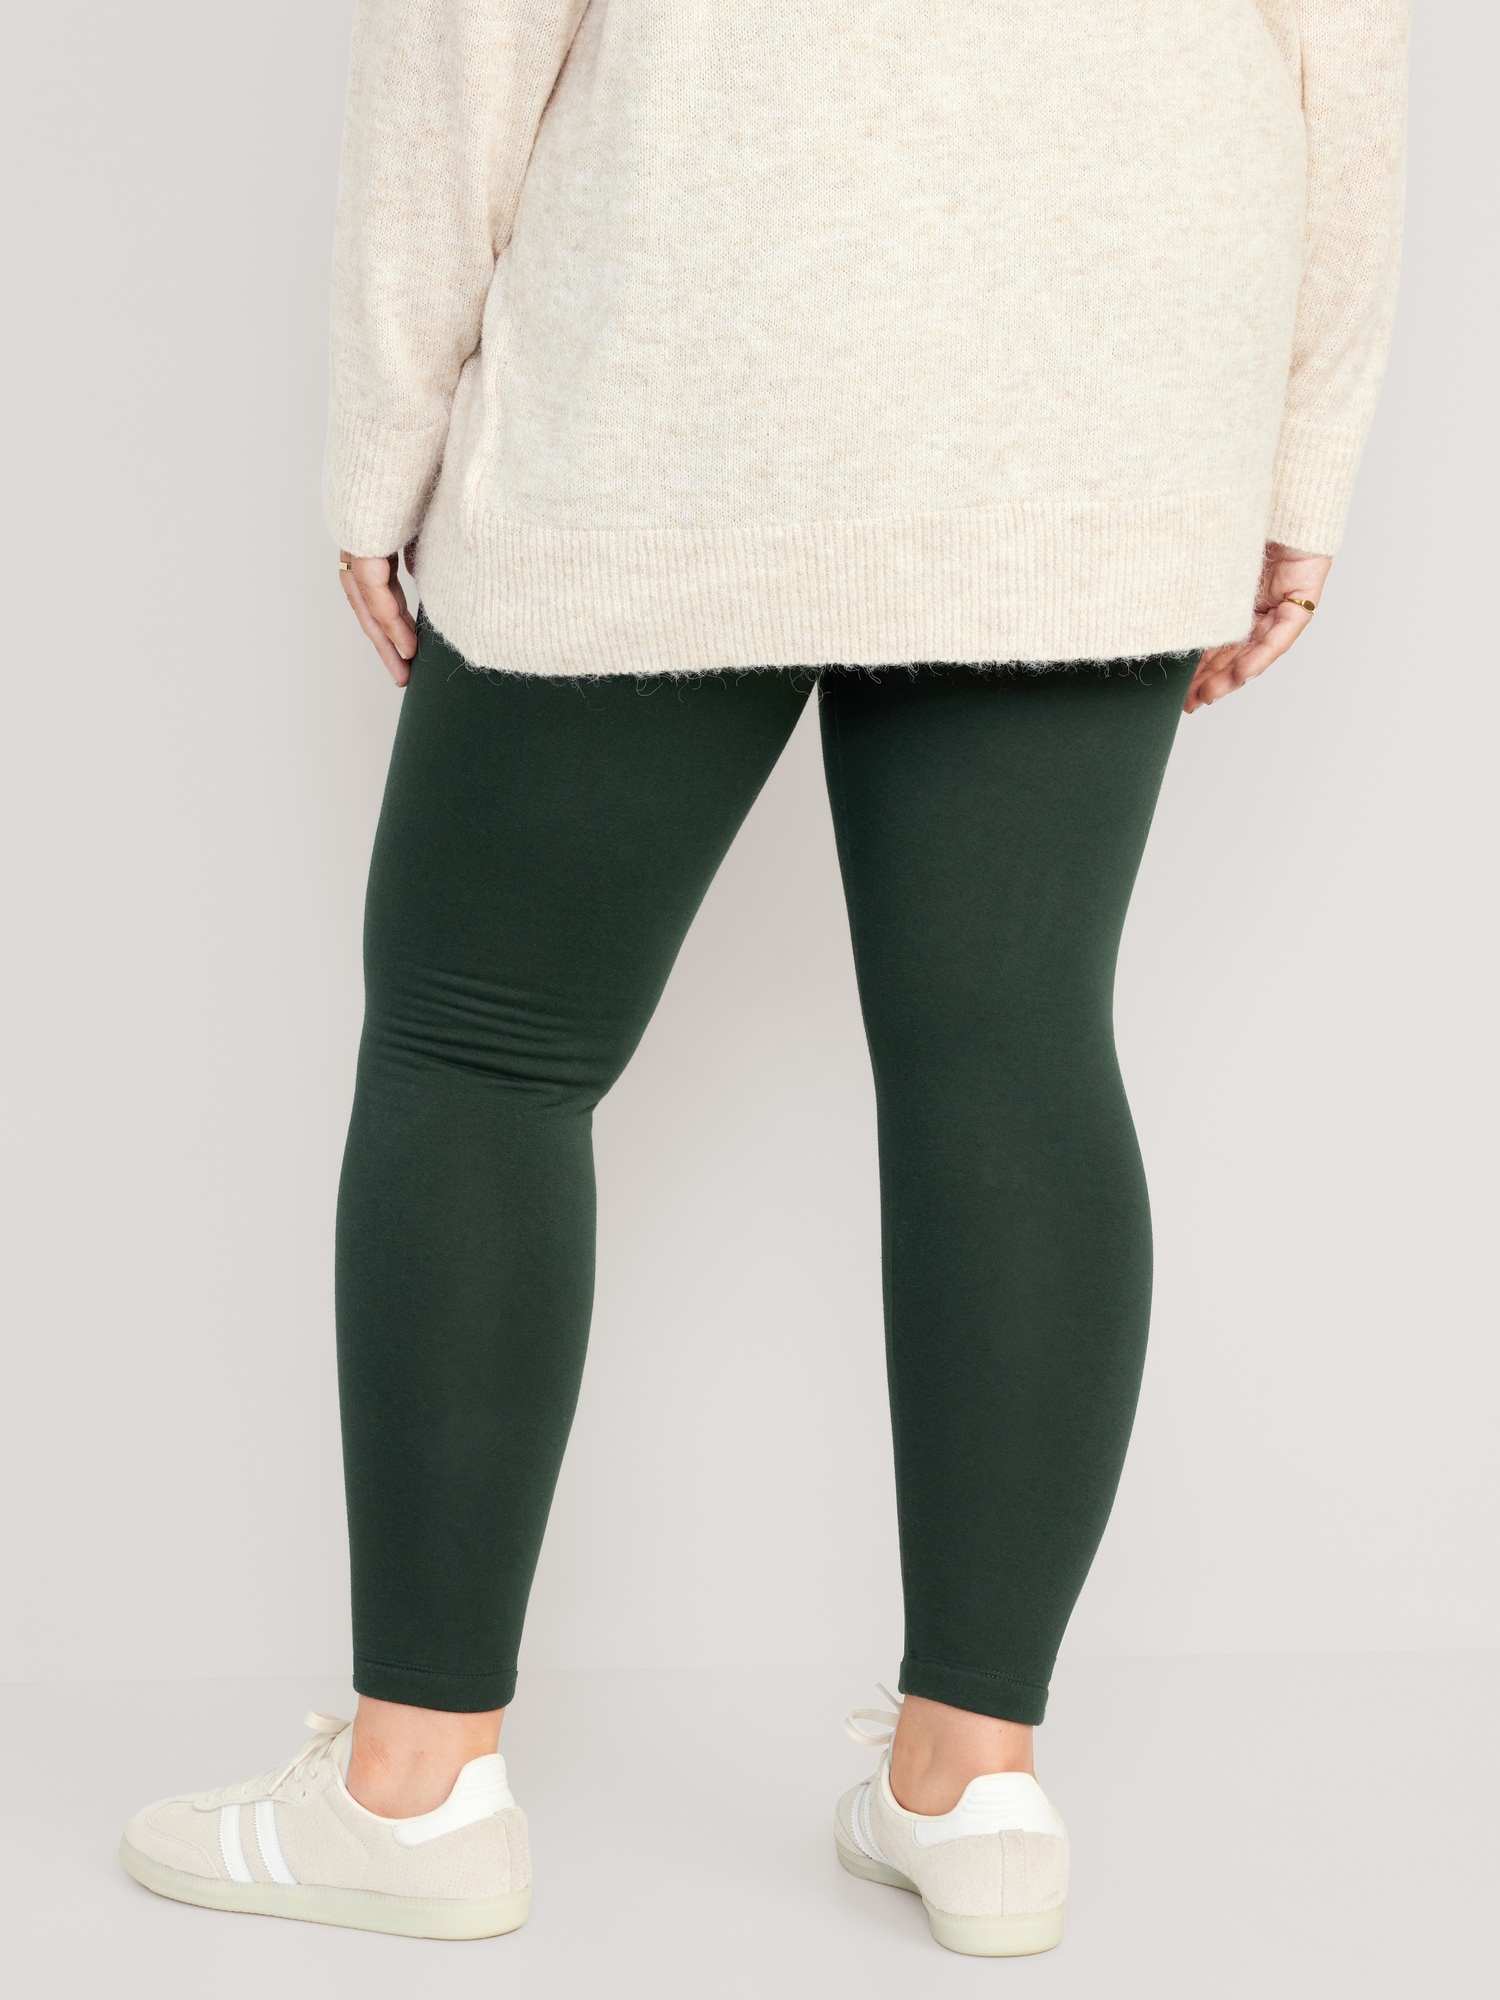 Old Navy Solid Green Leggings Size M (Tall) - 40% off